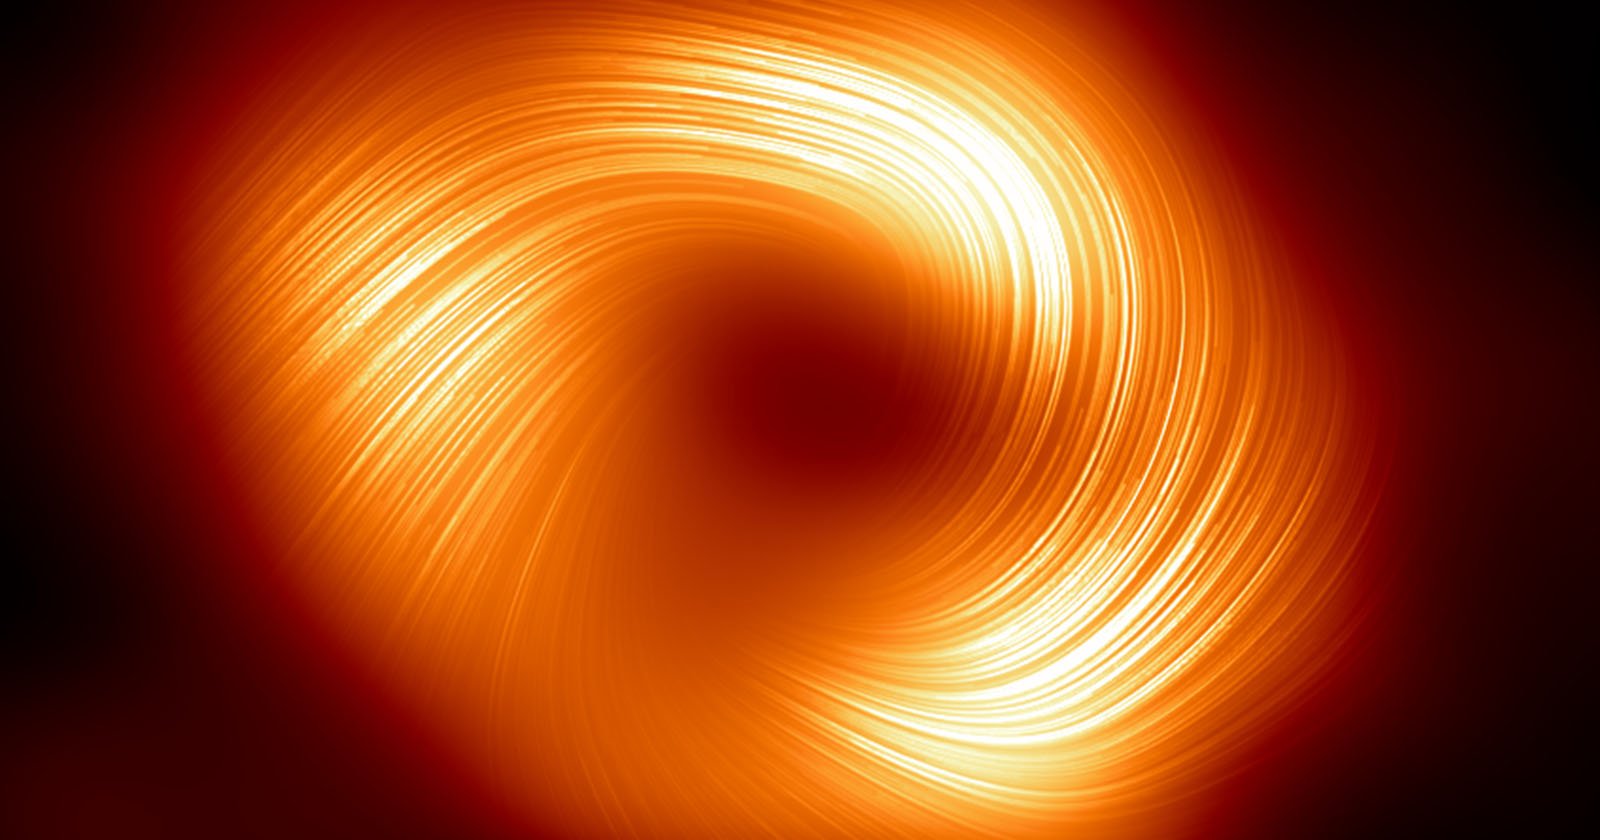 Black Hole at the Center of the Milky Way Has Beautiful Magnetic Spirals